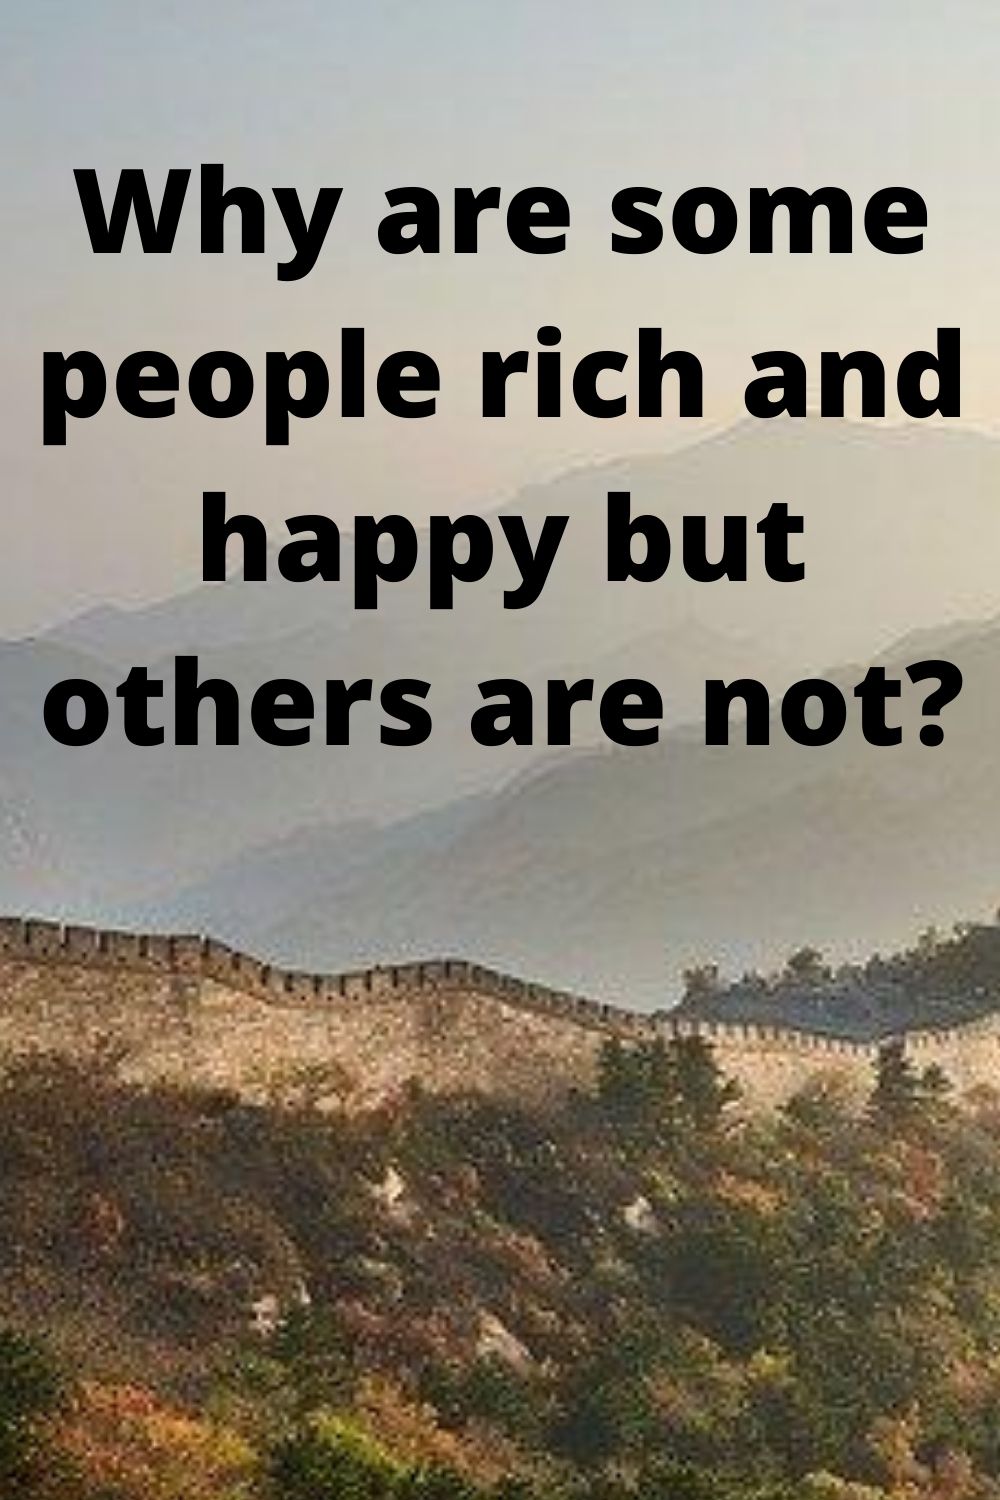 Rich: Why are some people rich and happy but others are not?